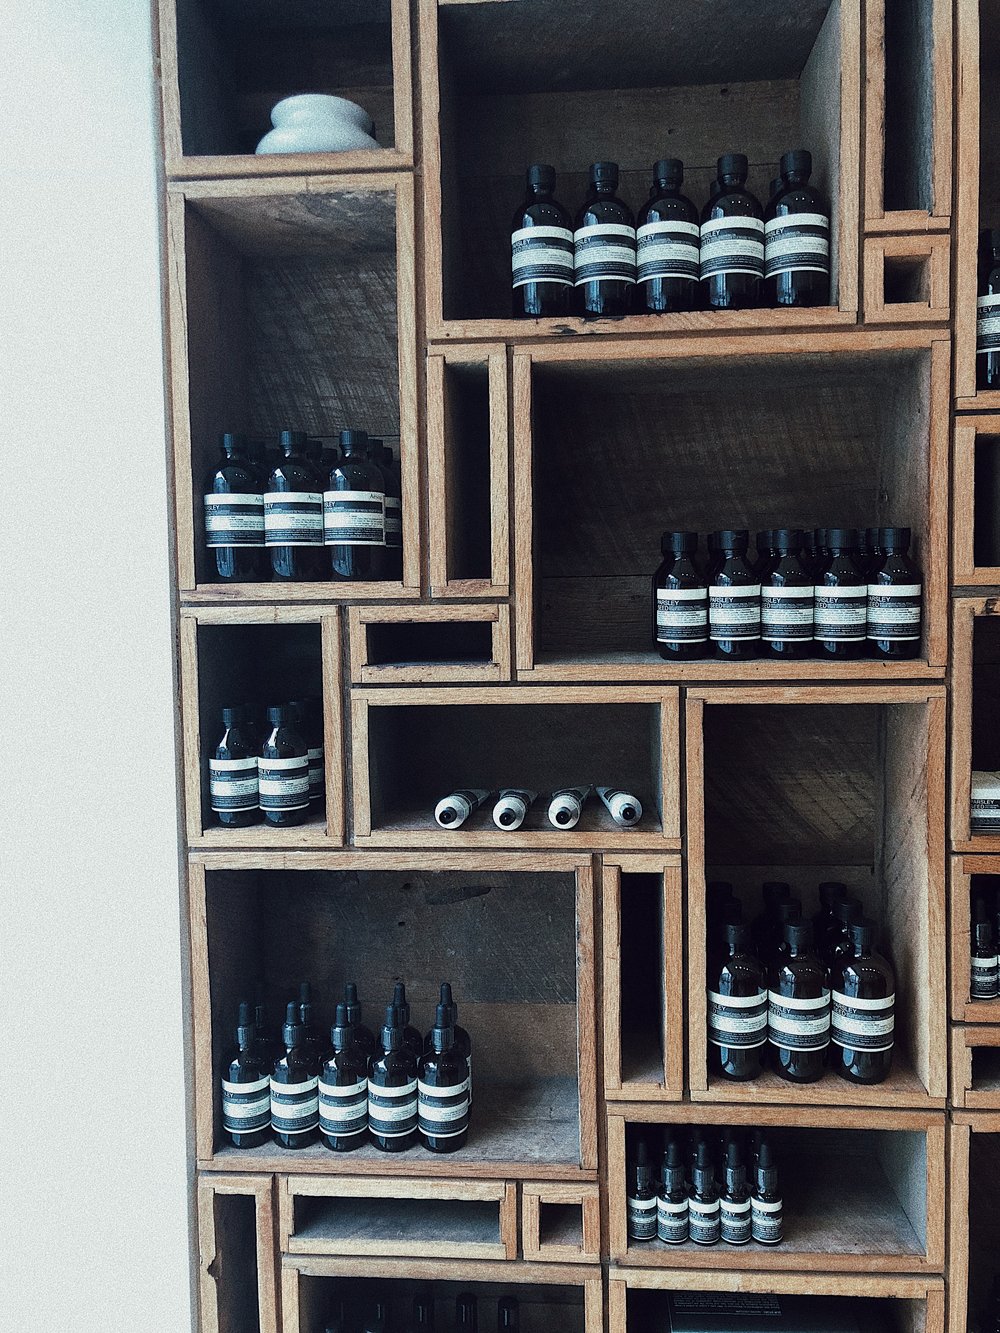  Aesop in Soho was also a stop with Nico. We're all about quality skincare, am I right? 